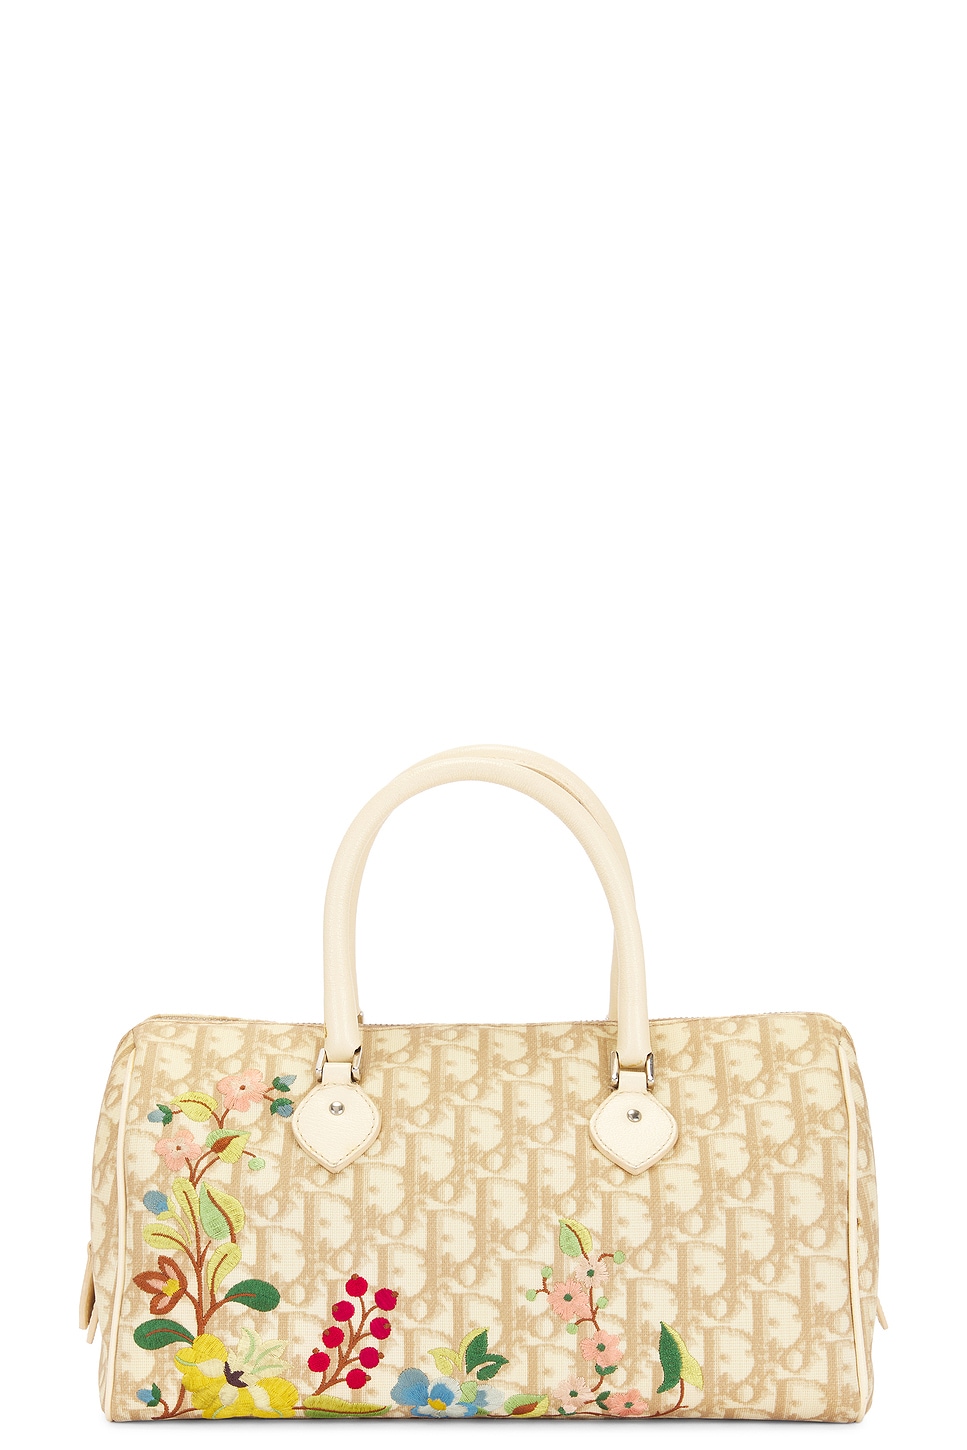 Dior Floral Embroidered Boston Bag In Beige